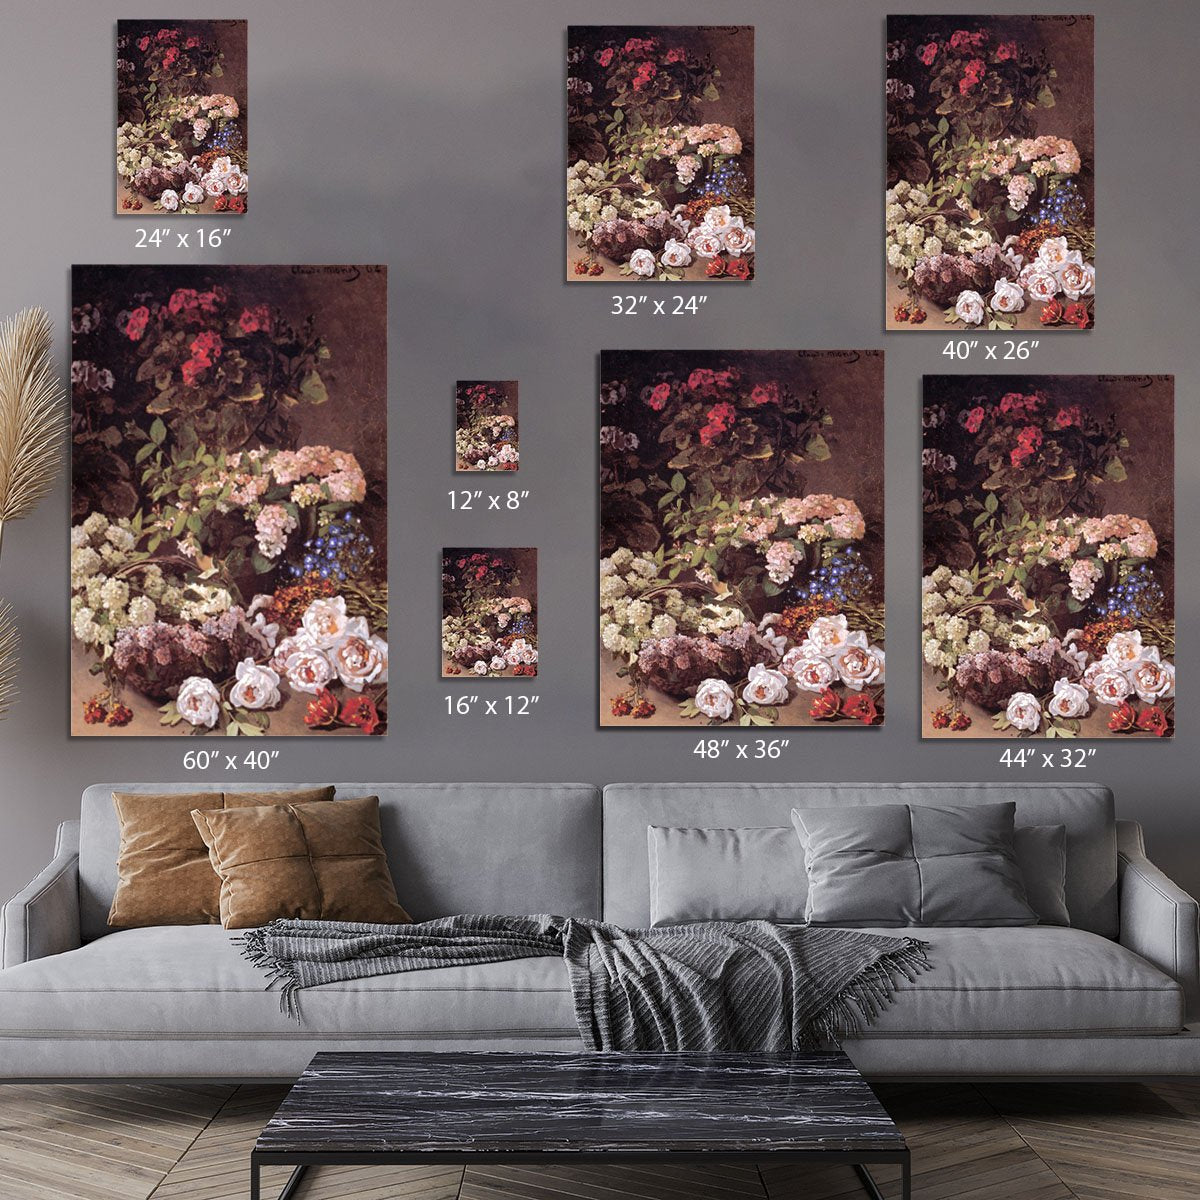 Spring Flowers by Monet Canvas Print or Poster